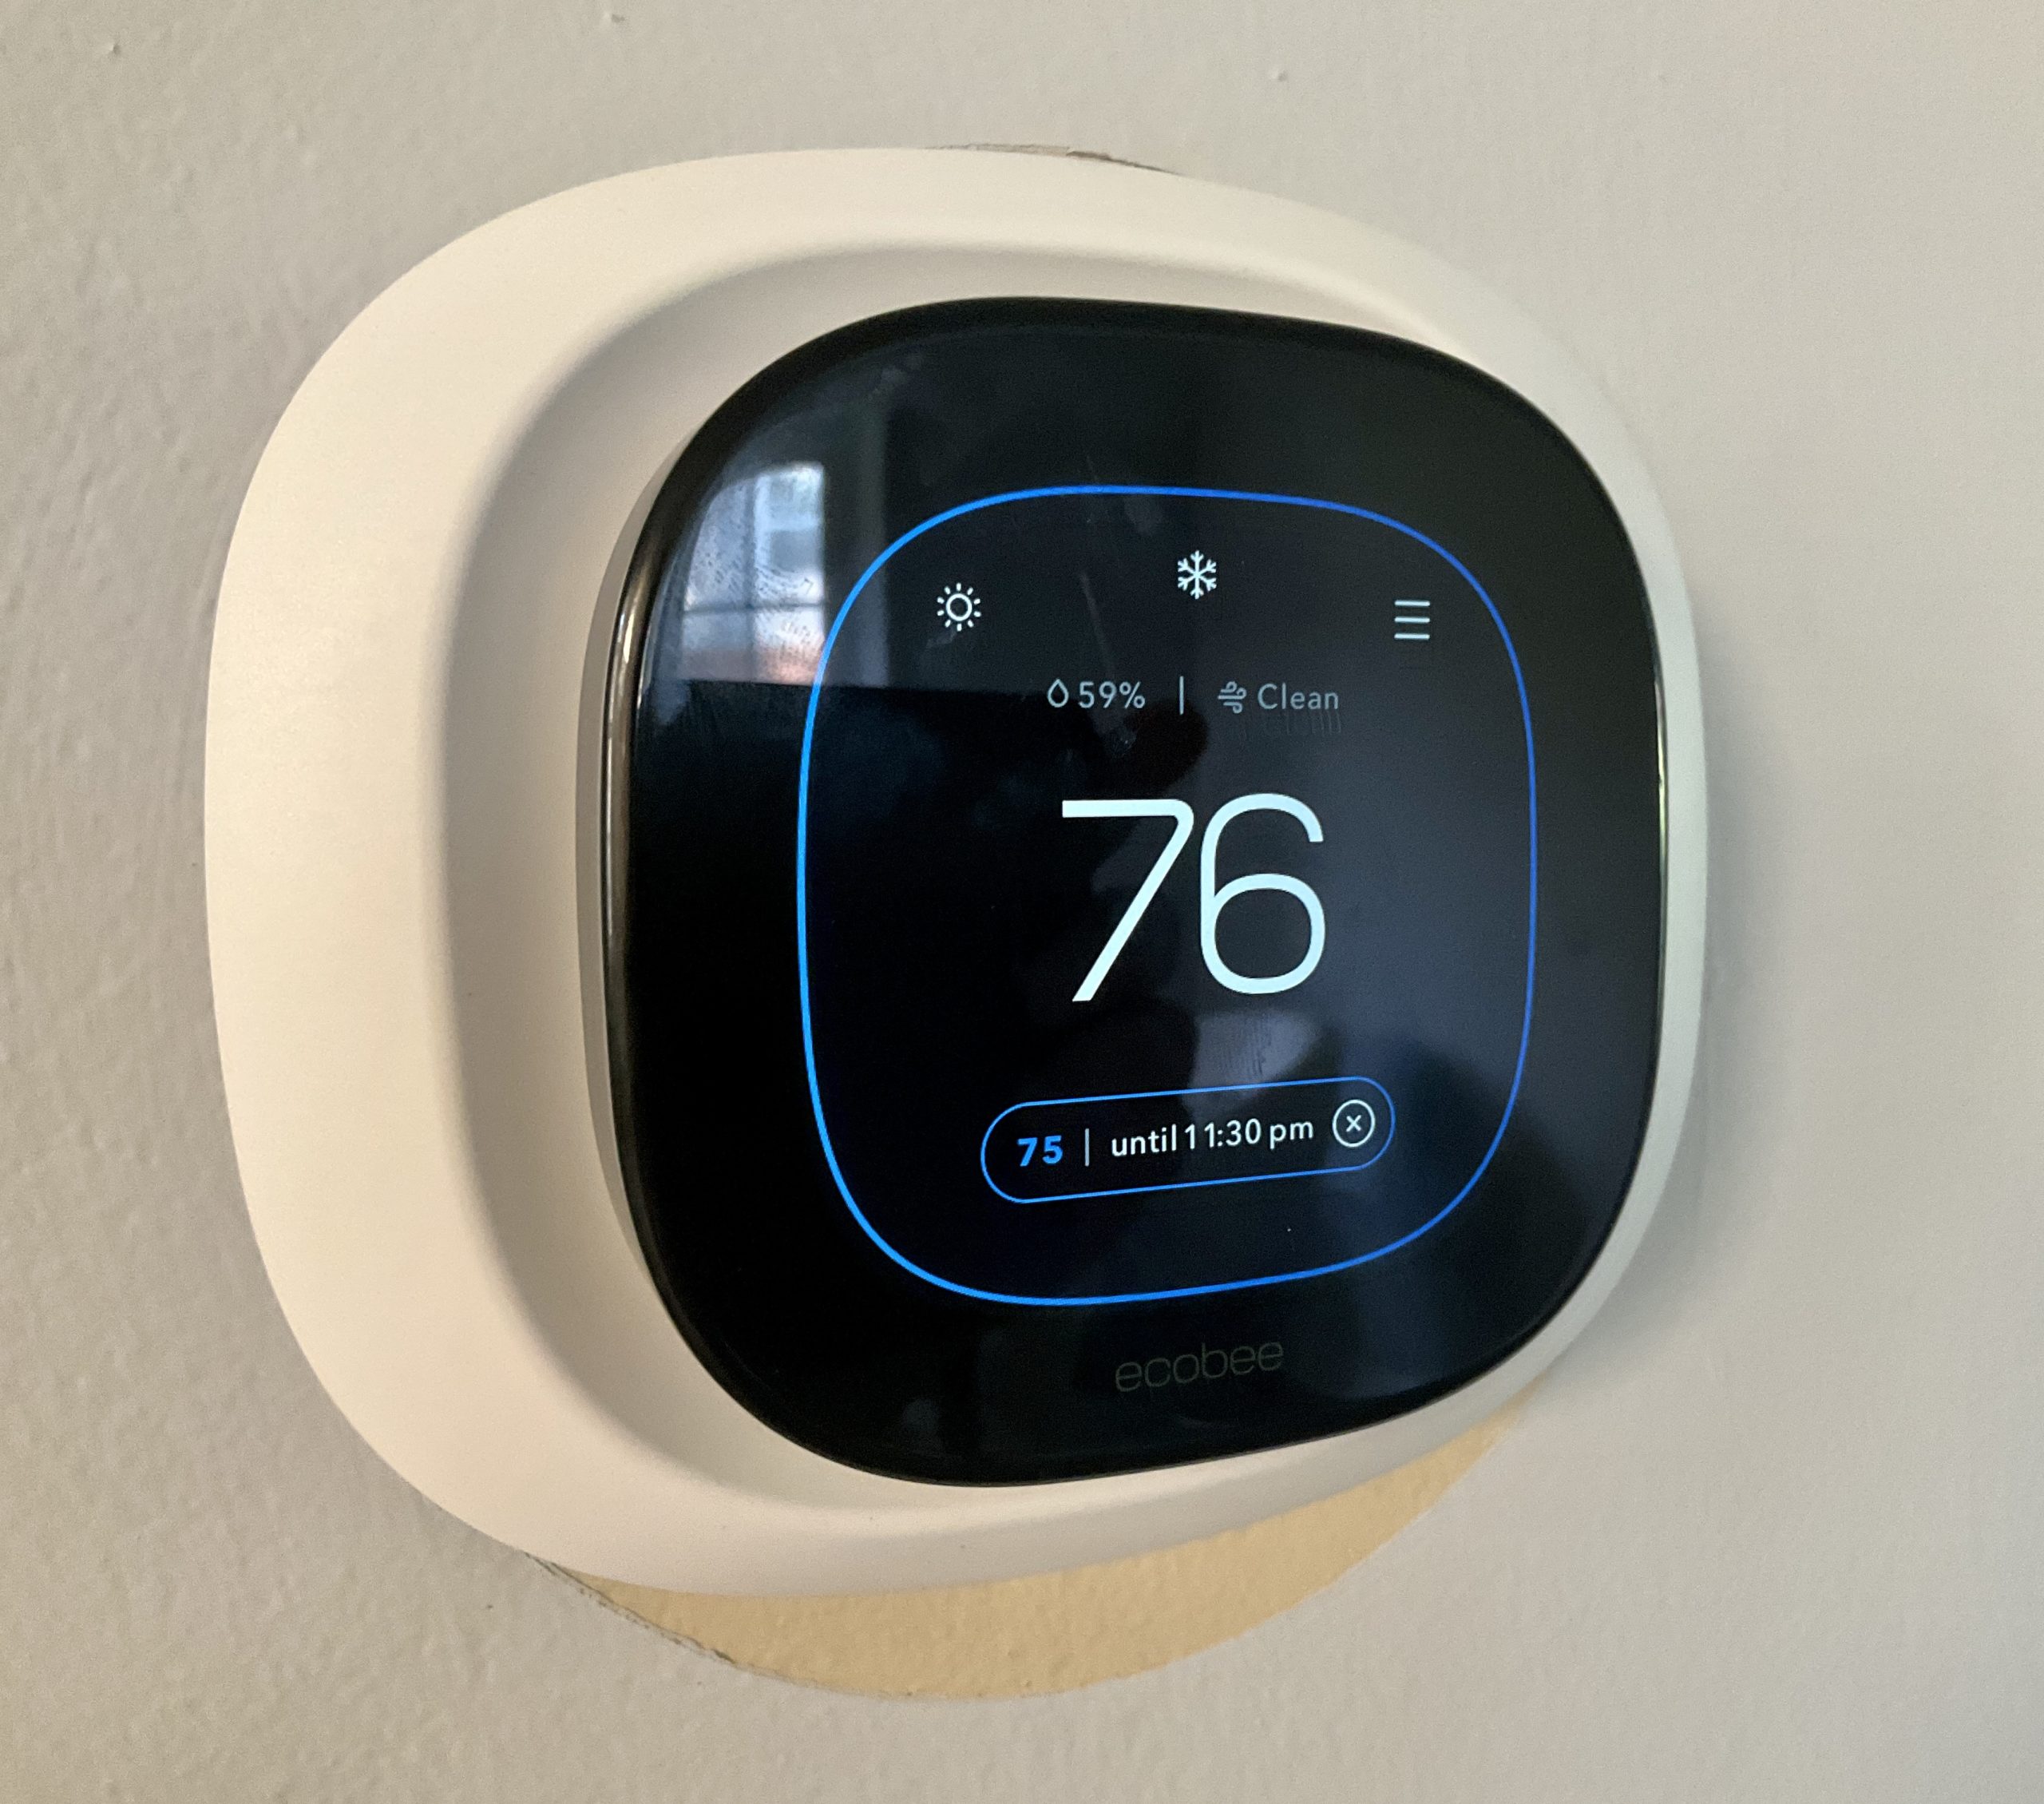 When will our smart homes have true occupancy sensors? - Stacey on IoT | Internet of Things news and analysis